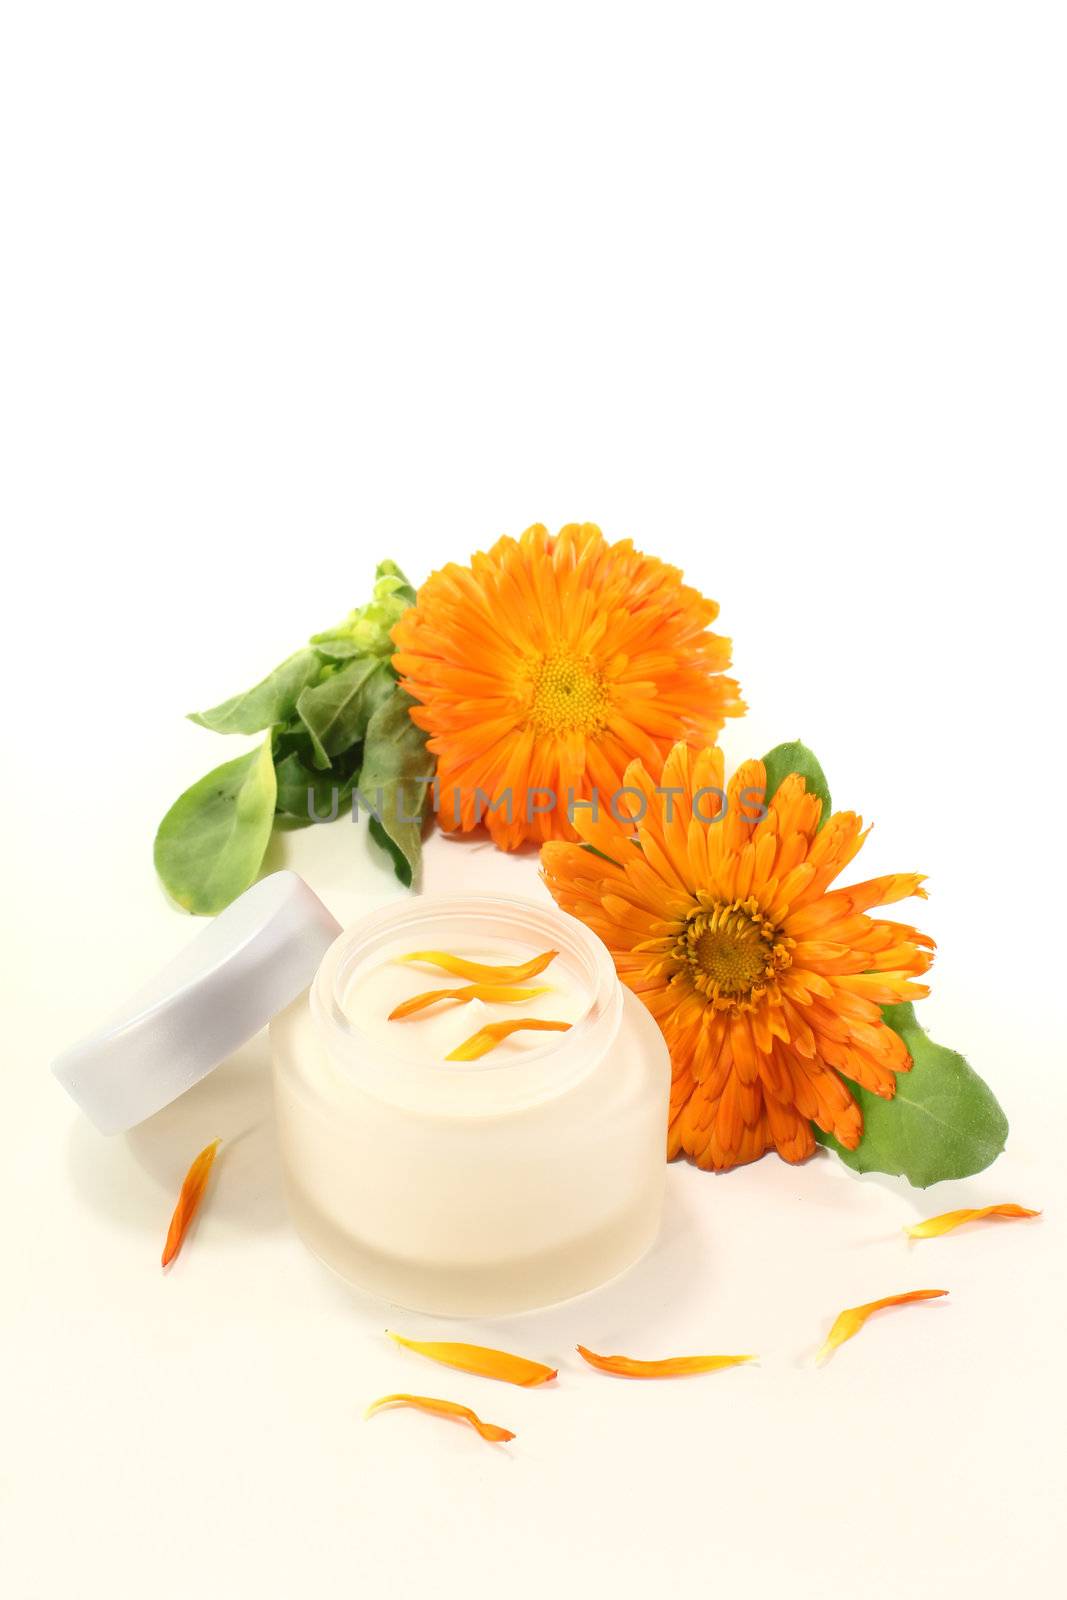 Calendula ointment with flowers and petals by discovery